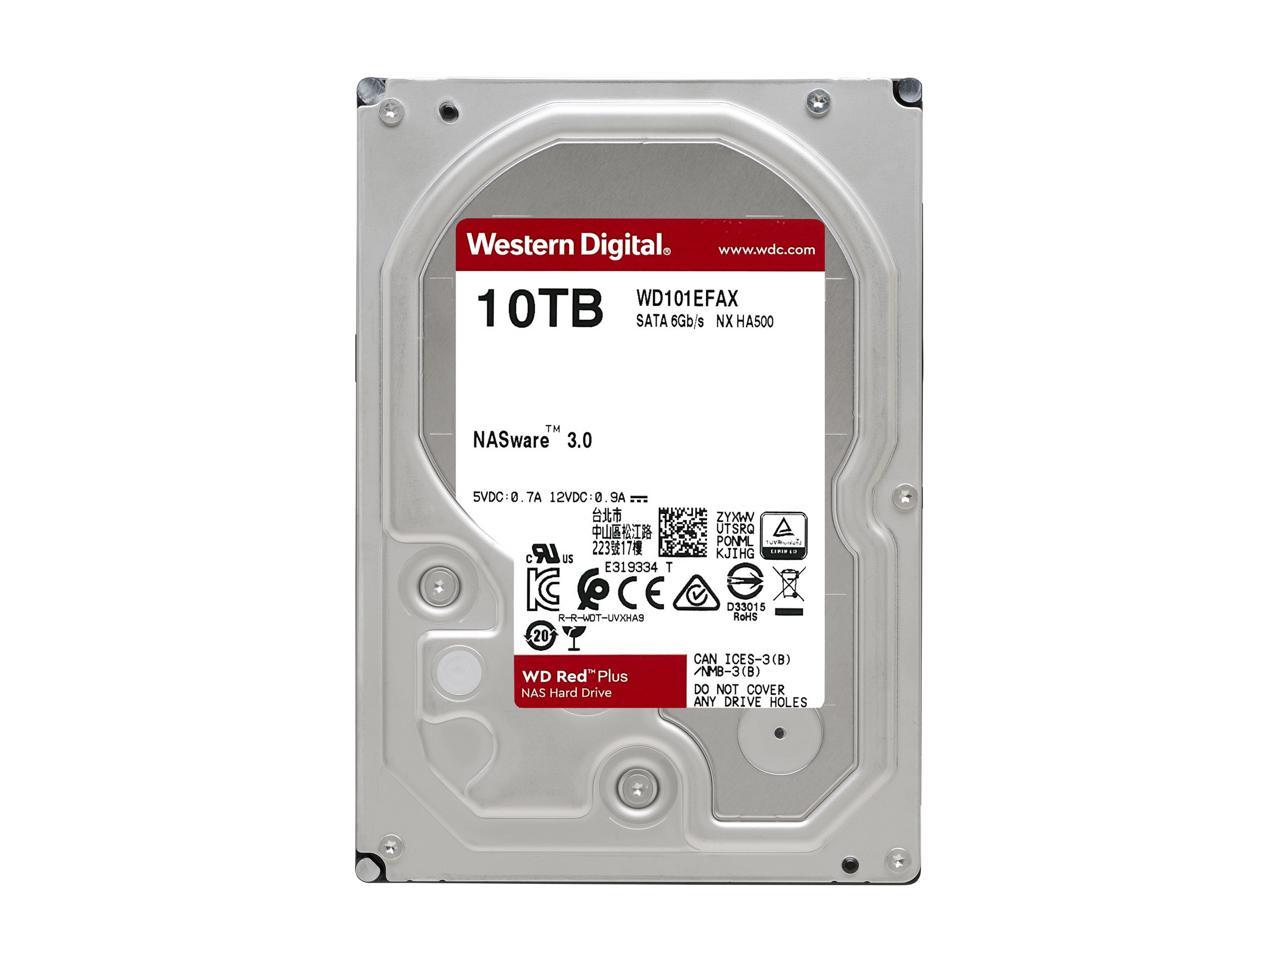 Western Digital-Disque dur WD Red NAS, 2 To, 3 To, 4 To-5400 tr/min, classe  SATA, 6 Go/s, 256 Mo de cache, 3.5 pouces